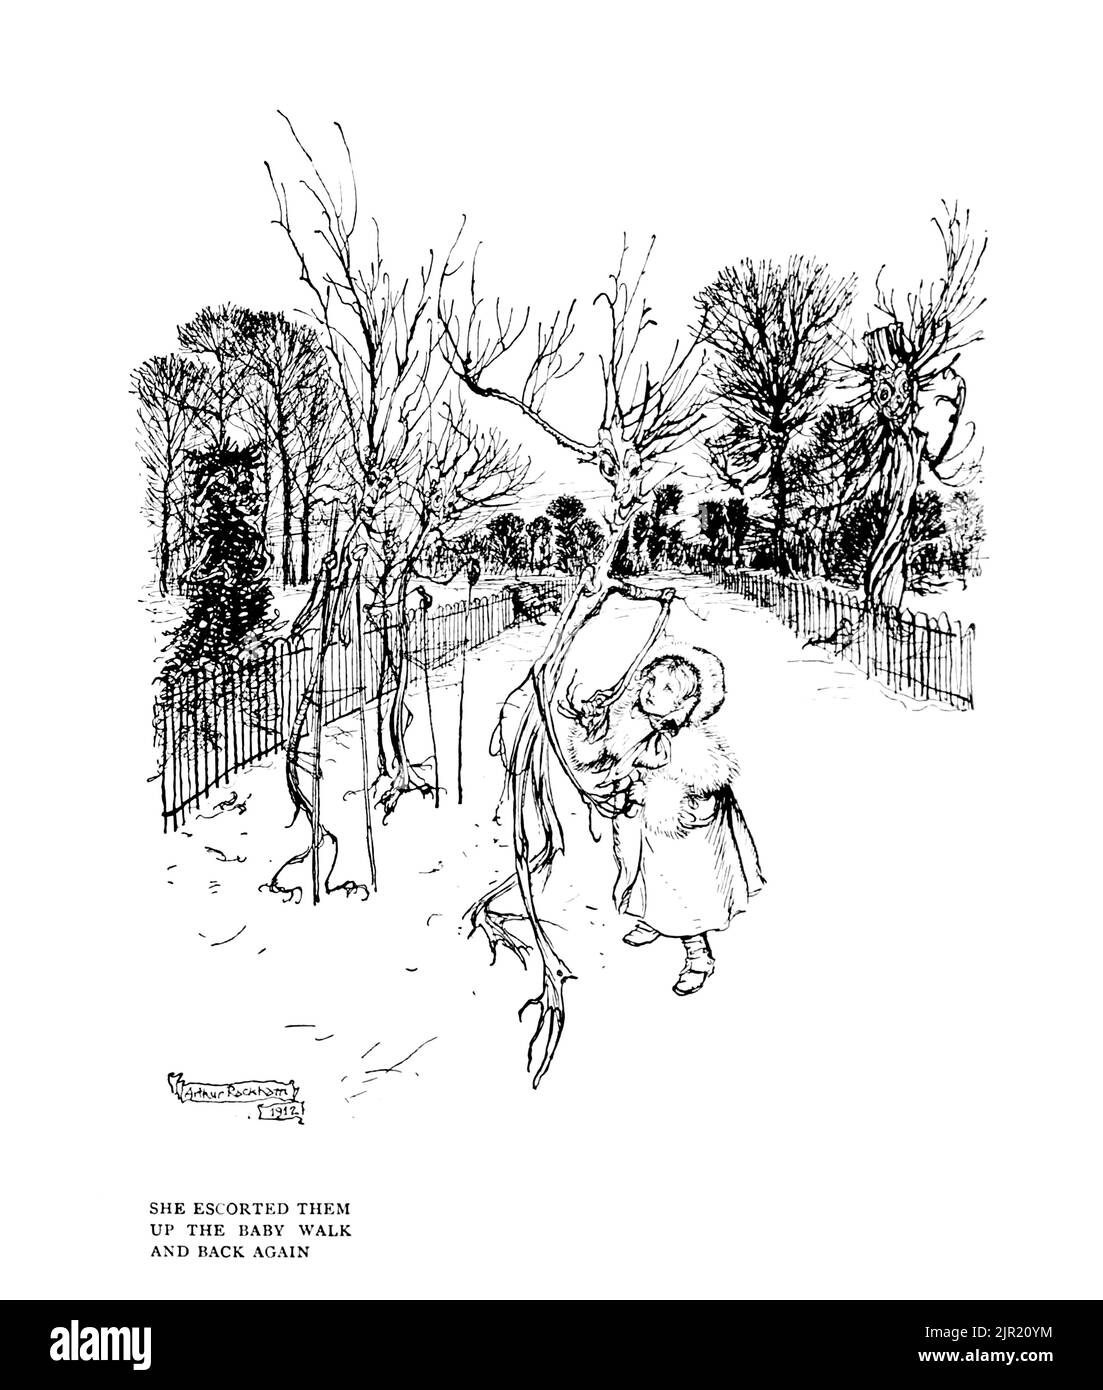 SHE ESCORTED THEM UP THE BABY WALK AND BACK AGAIN from the book ' Peter Pan in Kensington Gardens ' from ' The little white bird ' by Barrie, J. M (James Matthew) 1860-1937,  Illustrated by Arthur Rackham Publisher Hodder & Stoughton 1910 Stock Photo